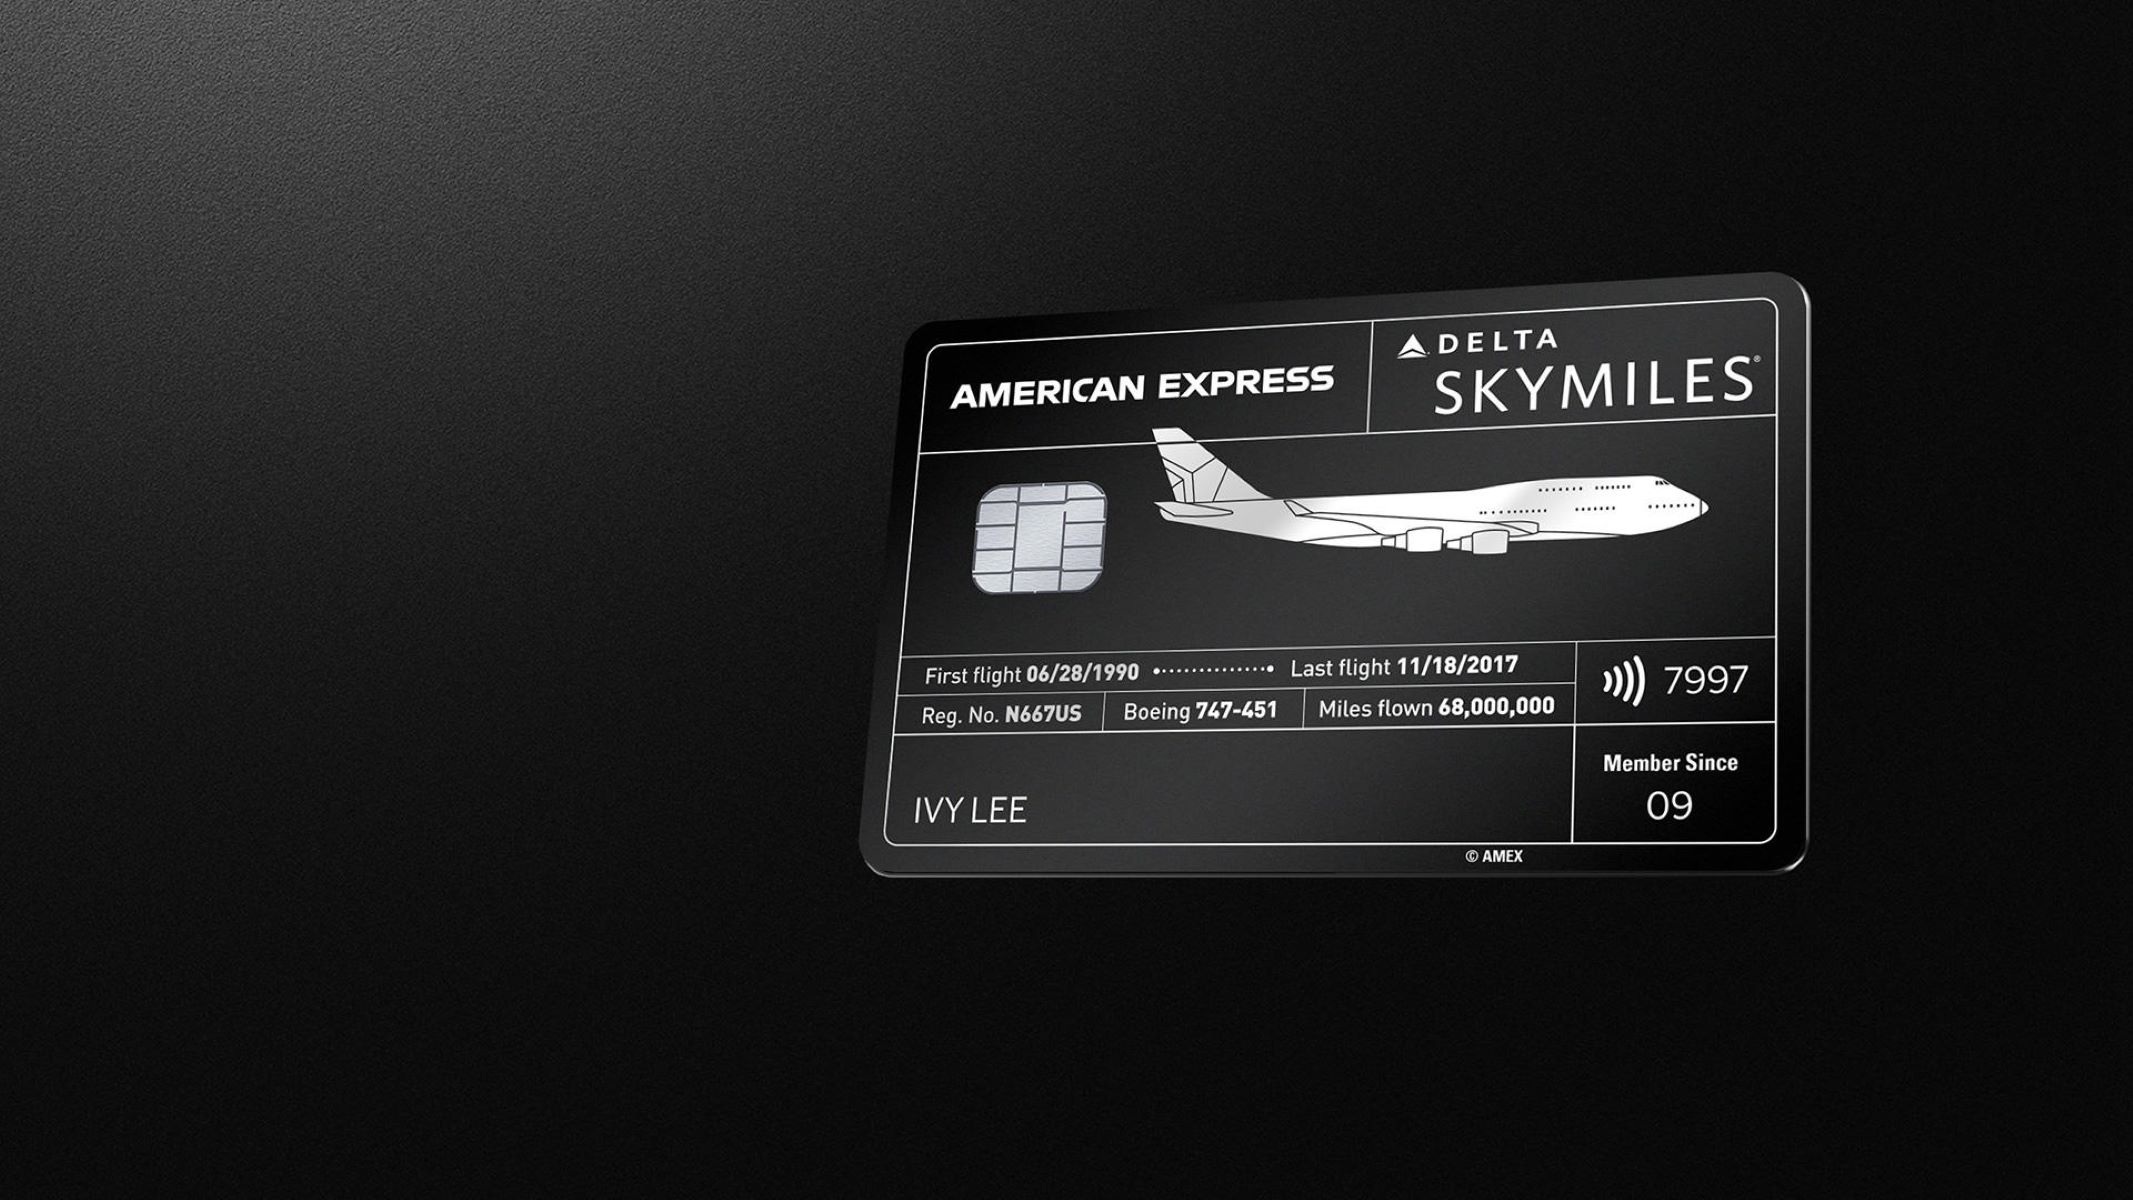 How To Add Delta Credit Card To Skymiles Account